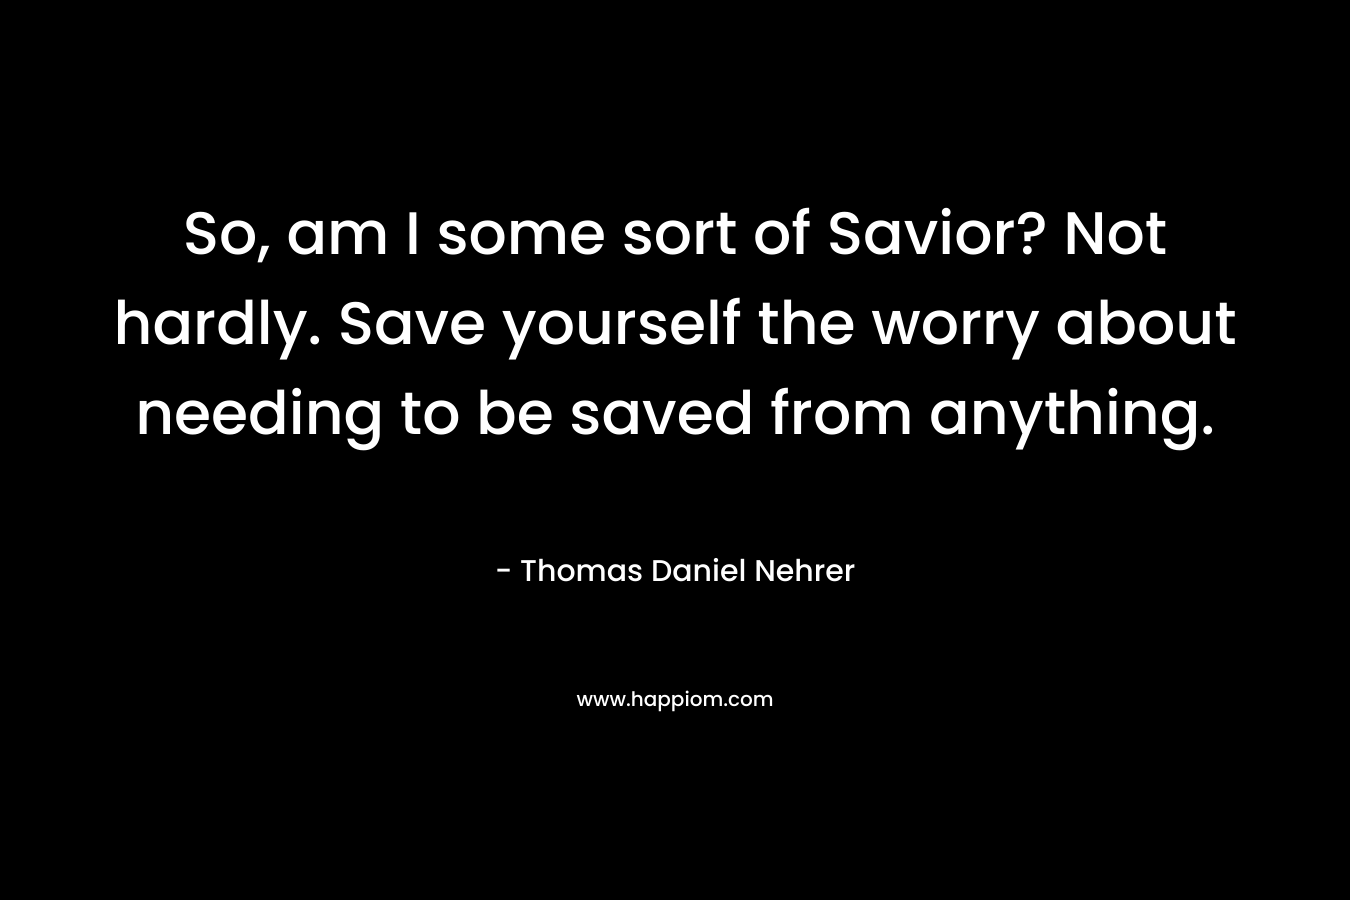 So, am I some sort of Savior? Not hardly. Save yourself the worry about needing to be saved from anything. – Thomas Daniel Nehrer